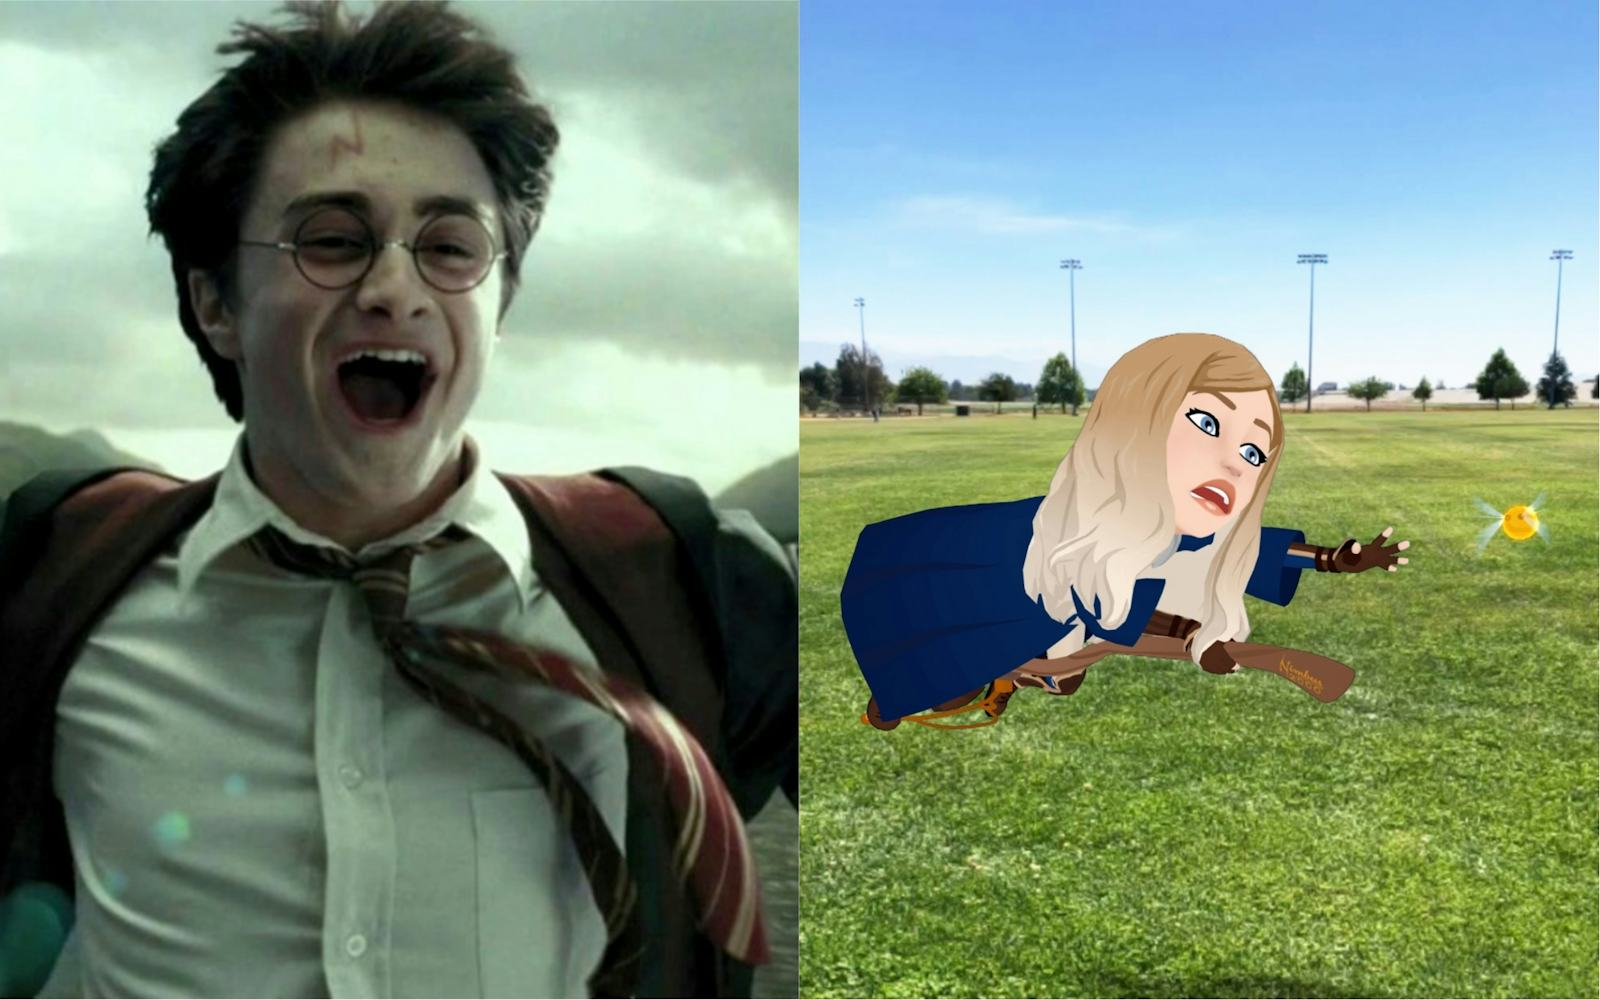 How To Get The Harry Potter Quidditch 3d Bitmoji Lens On Snapchat And Celebrate Harry S Birthday